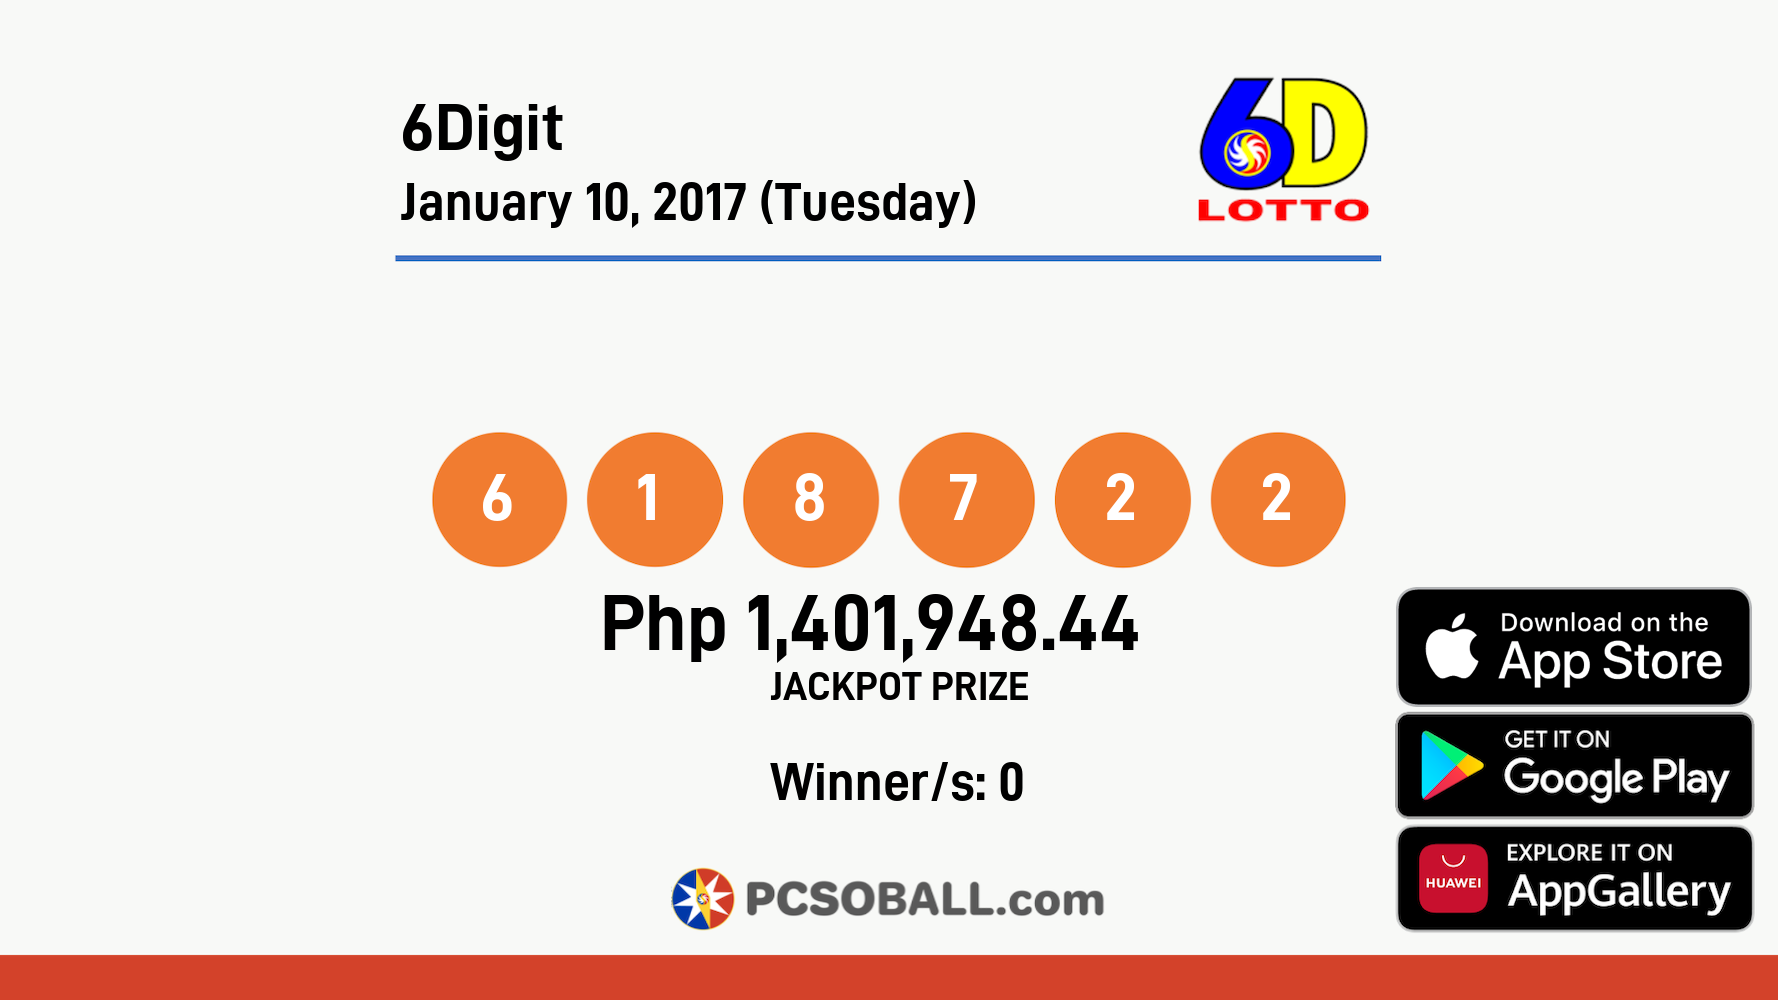 6Digit January 10, 2017 (Tuesday) Result